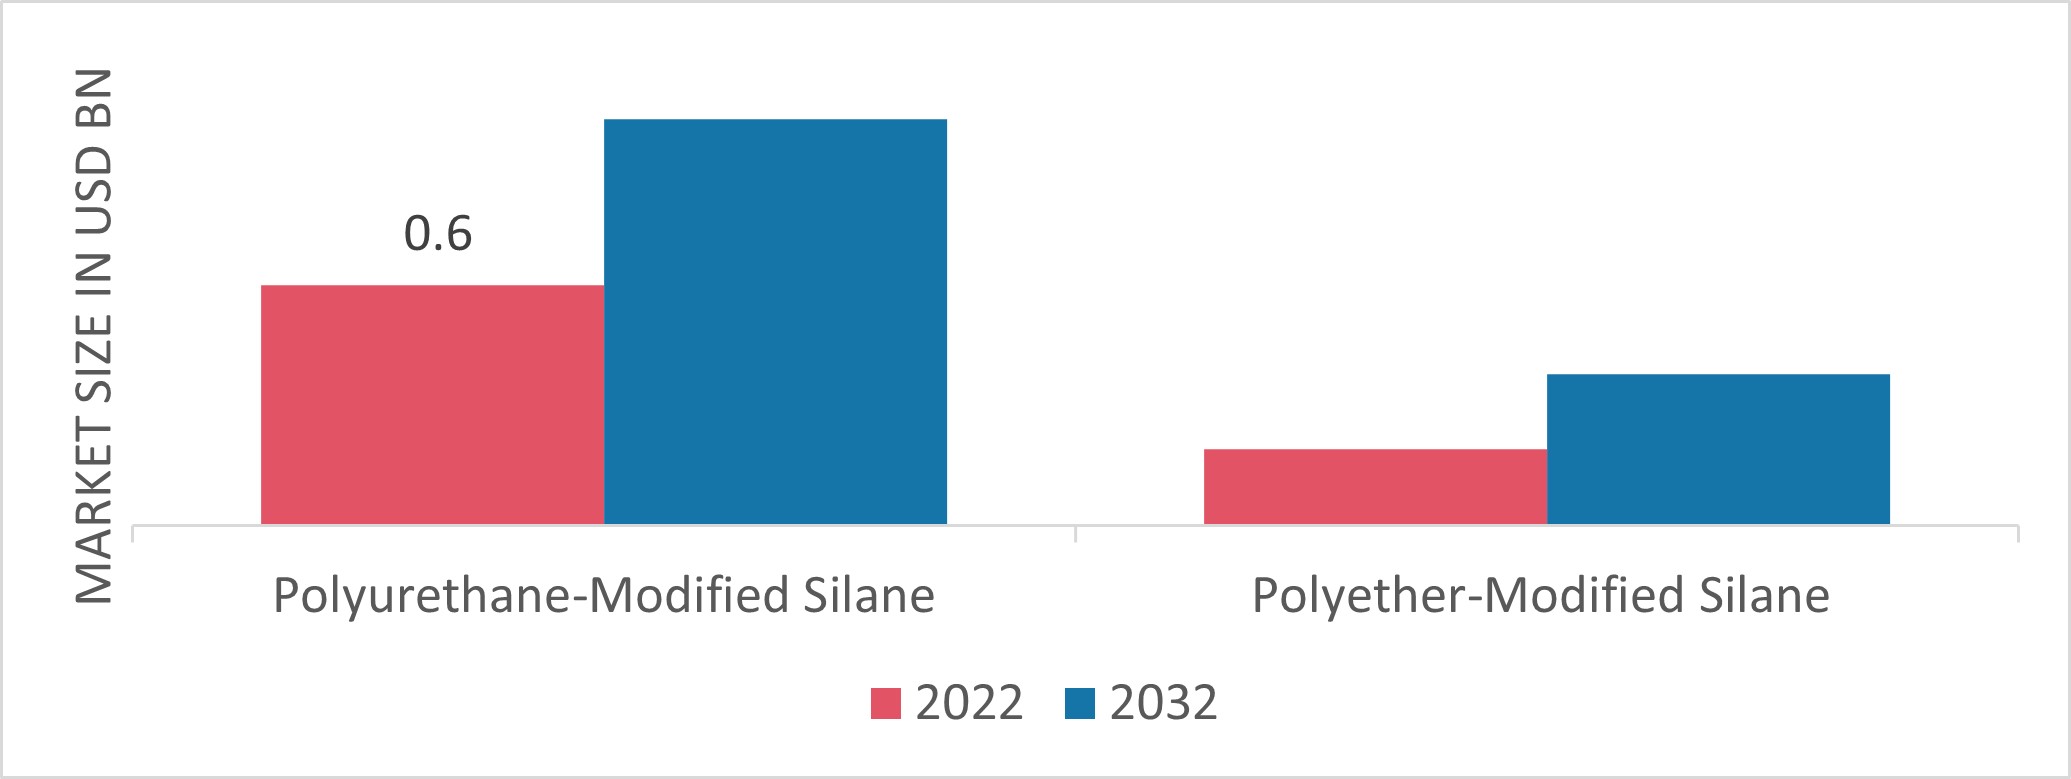 Silane Modified Polymers Market, by type, 2022 & 2032